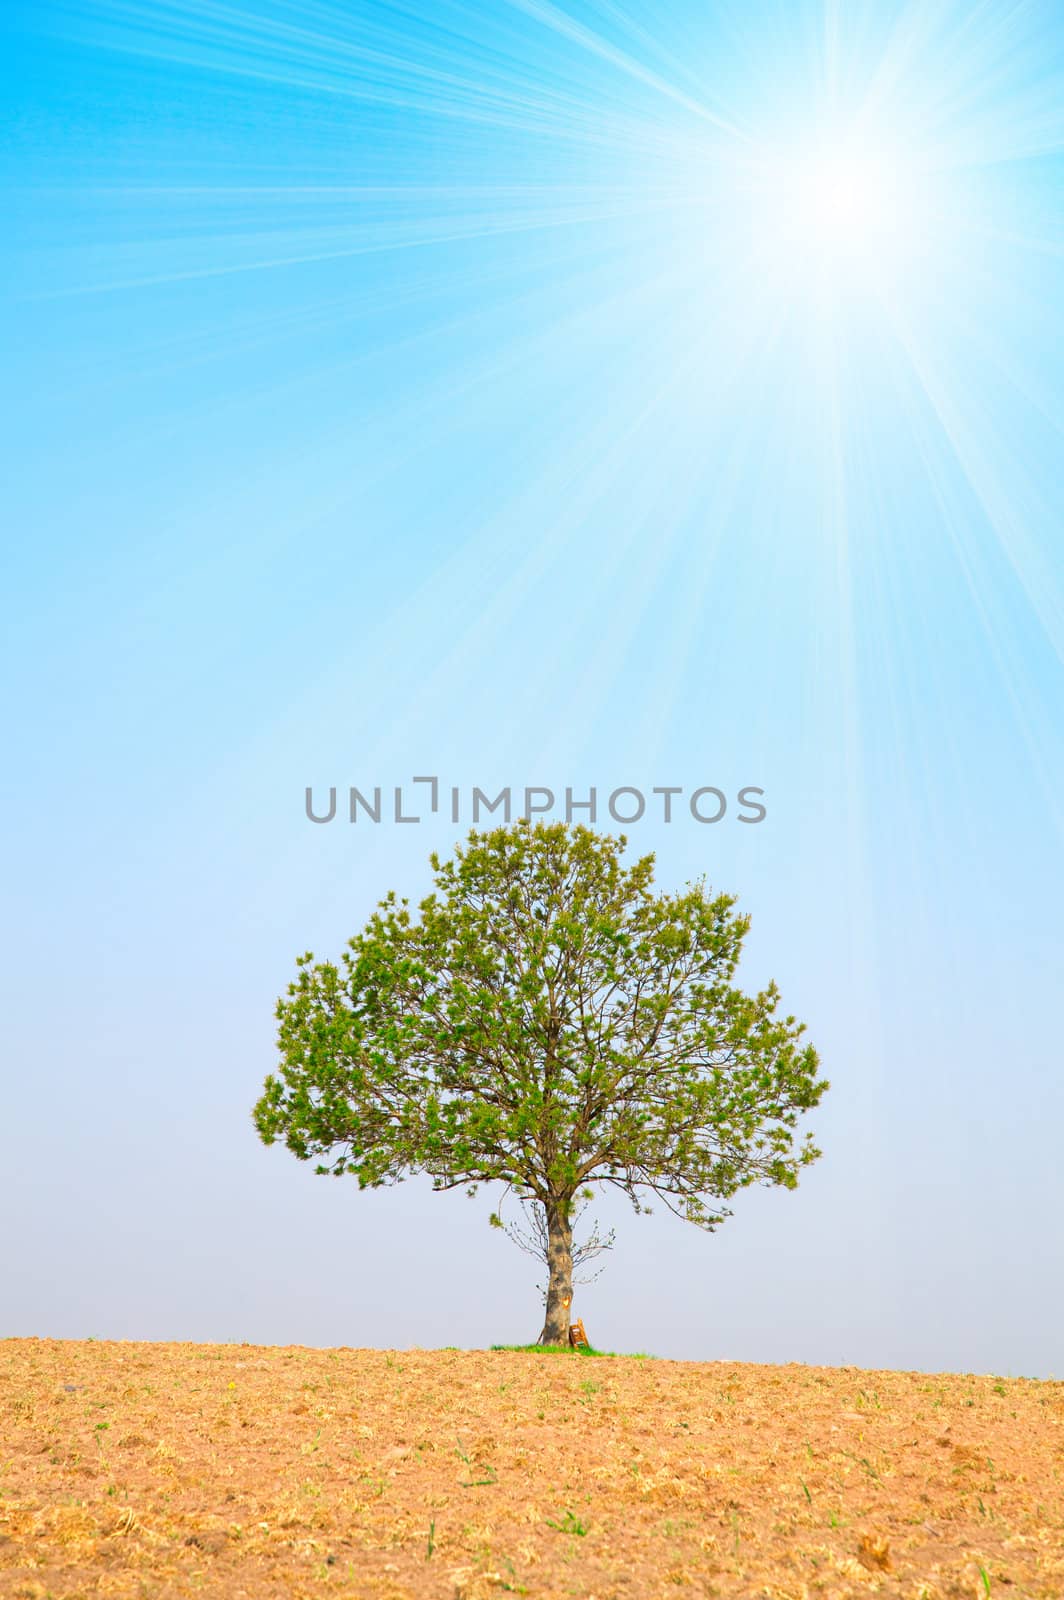 tree and sun on blue sky, around on the ploughed earth. 